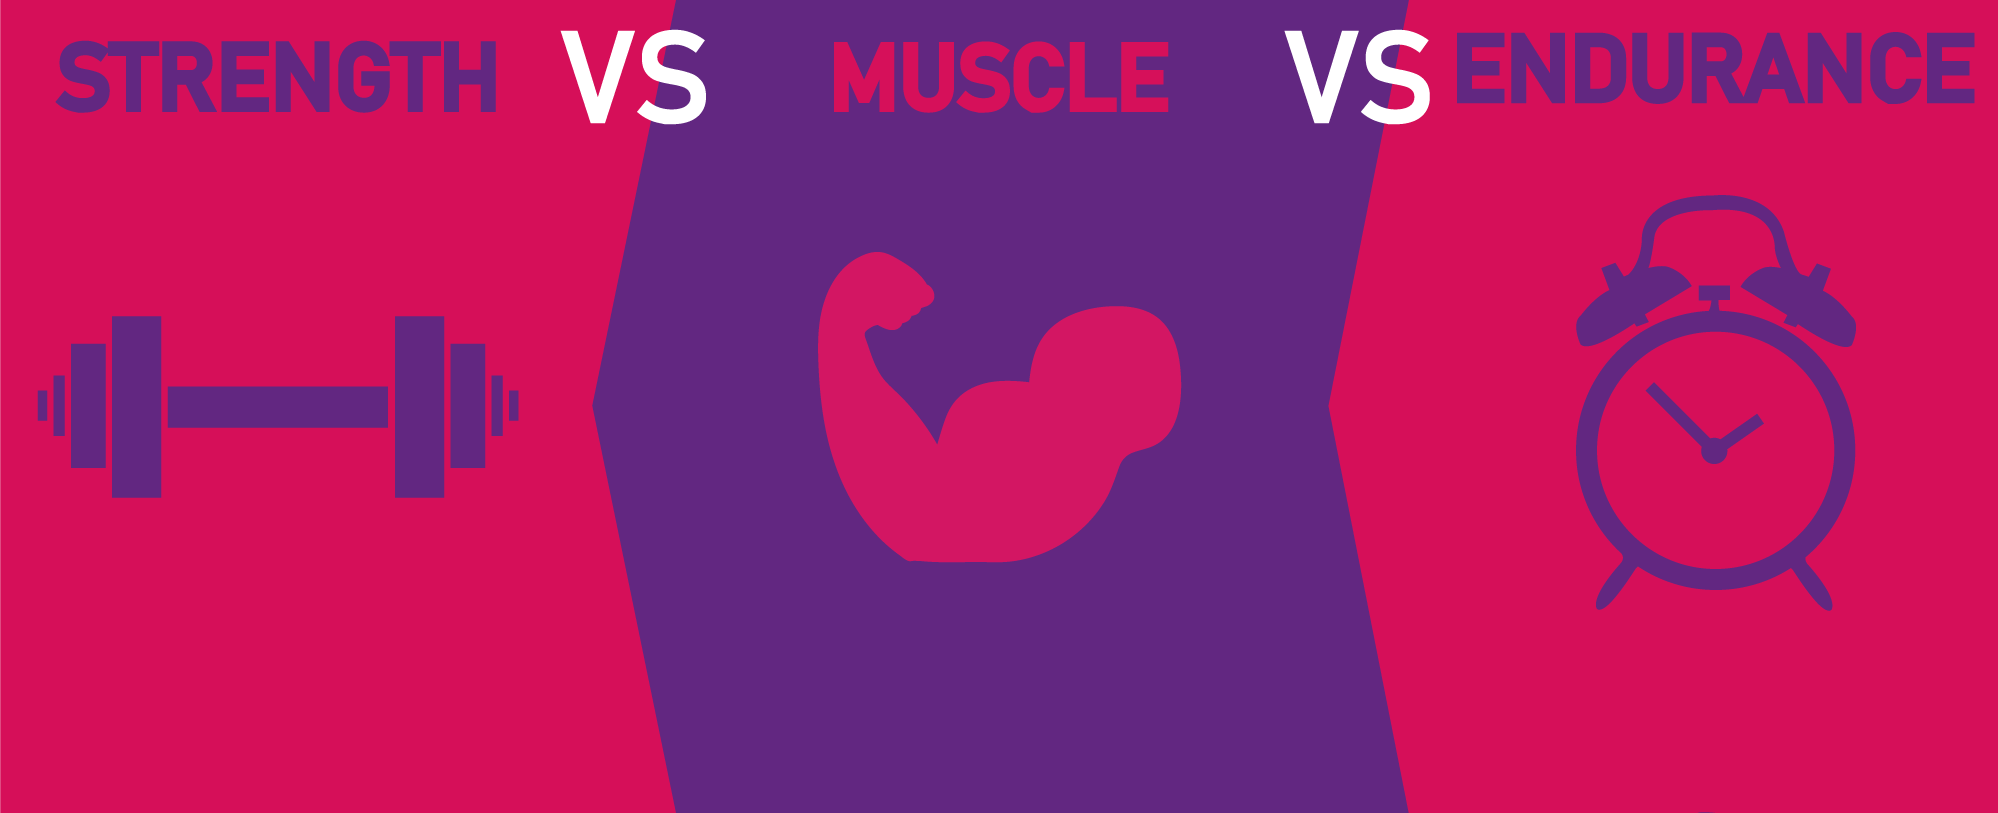 Building Strength Muscle vs Endurance | by Dhimant Indrayan | House of Hypertrophy | Medium